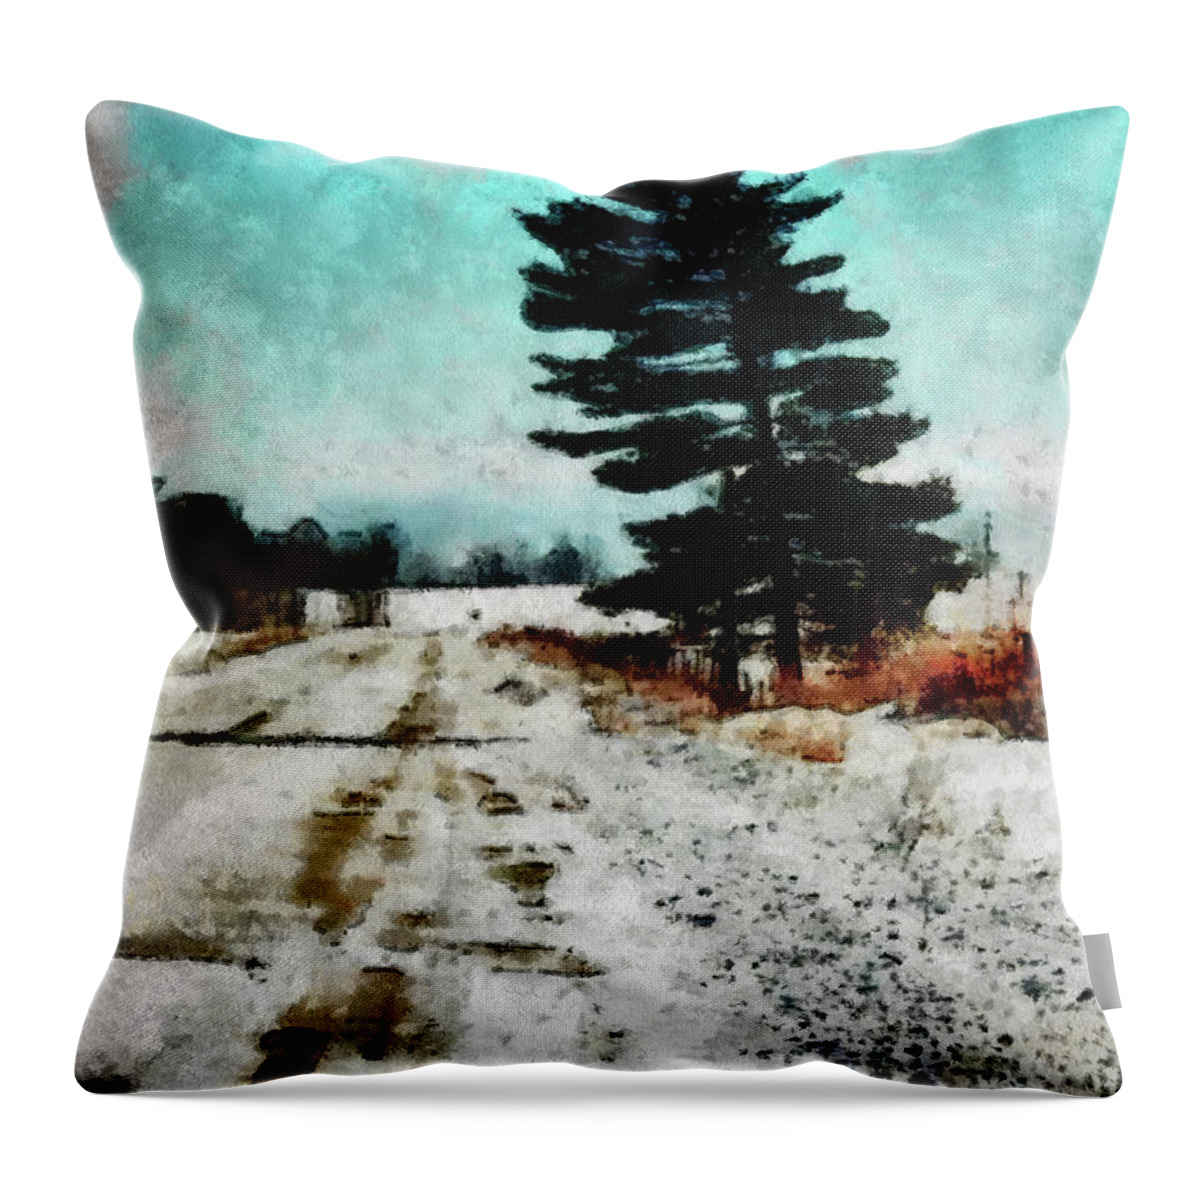 Fir Tree Throw Pillow featuring the digital art Wintry Altona Road by Leslie Montgomery